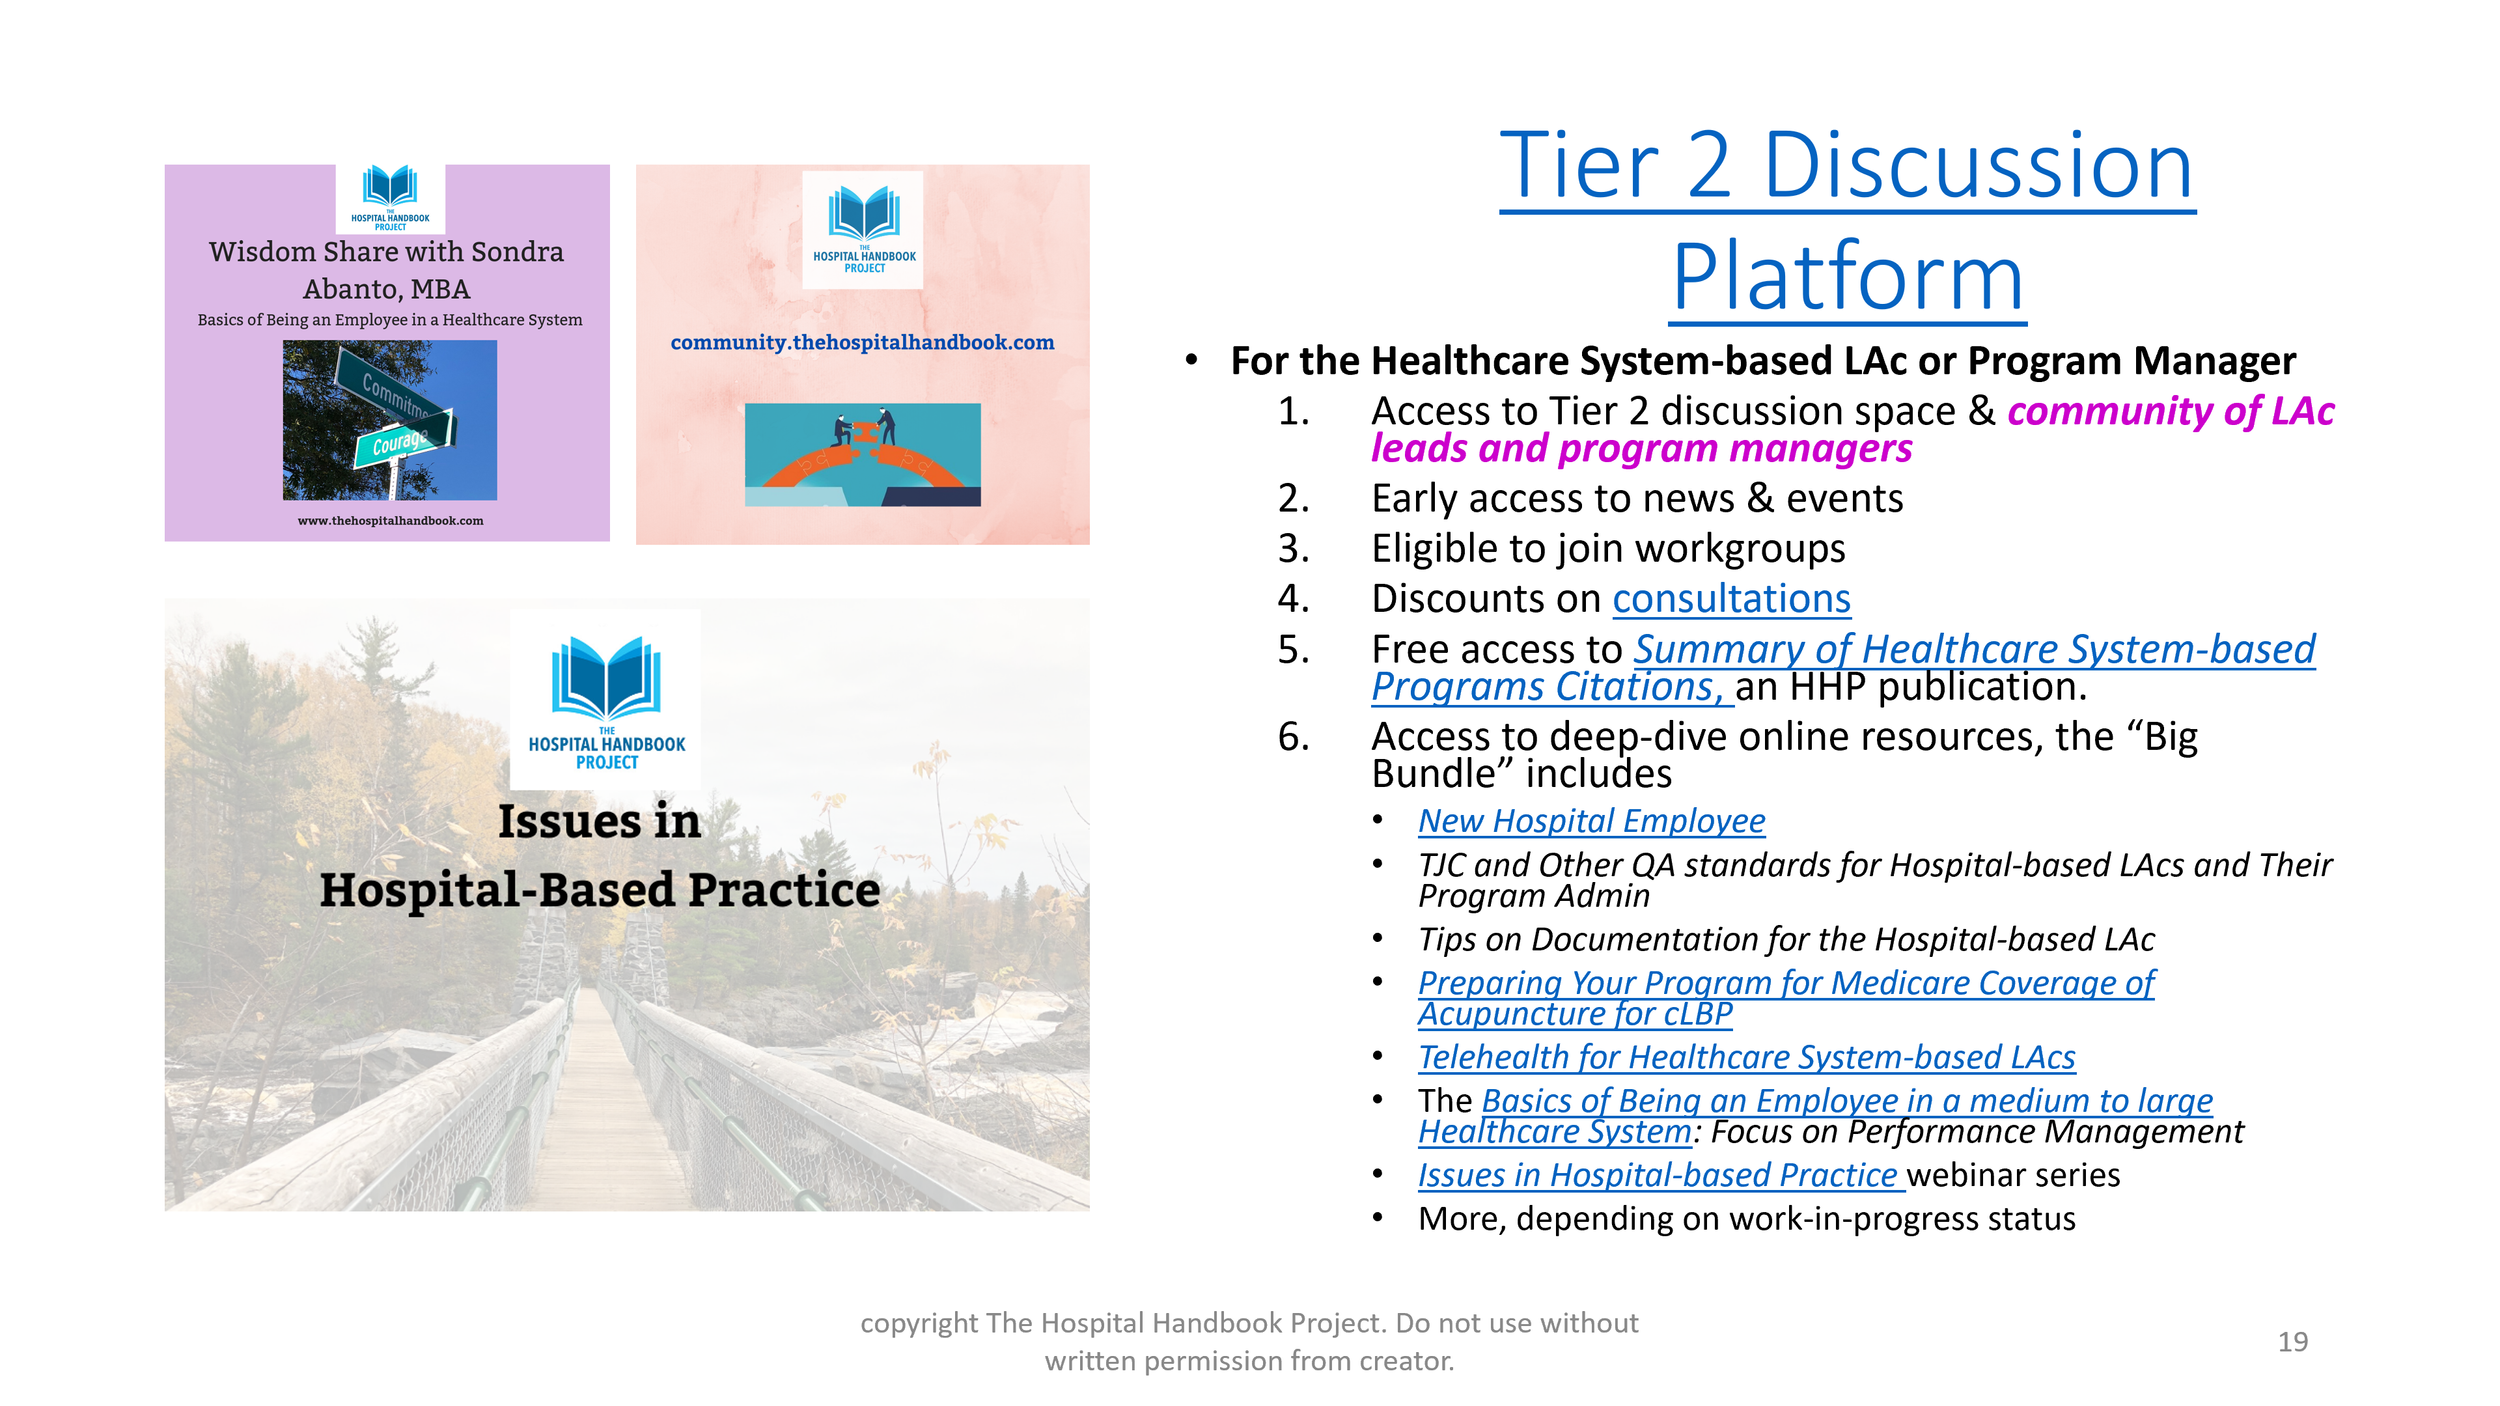 How 2 Hire_Tier 2 Discussion platform info_small size.png